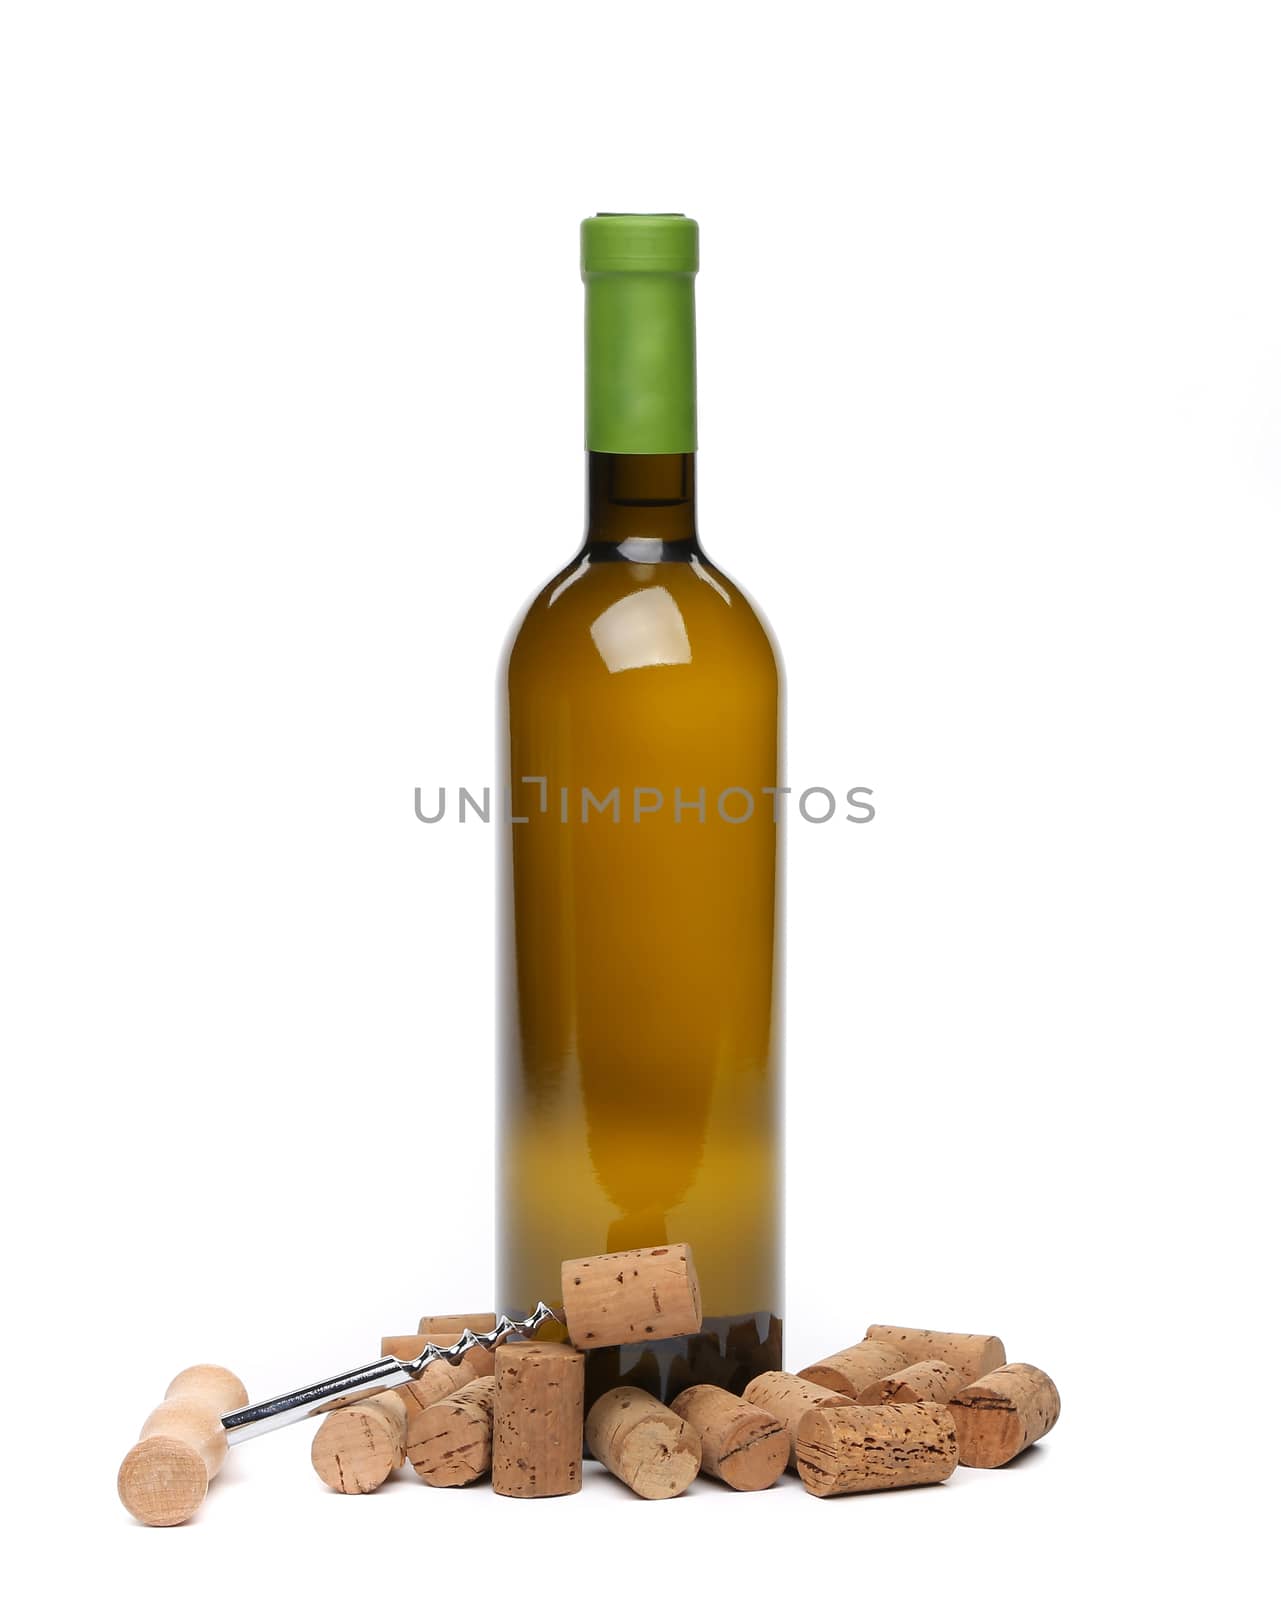 A bottle of wine, corks and corkscrew. by indigolotos